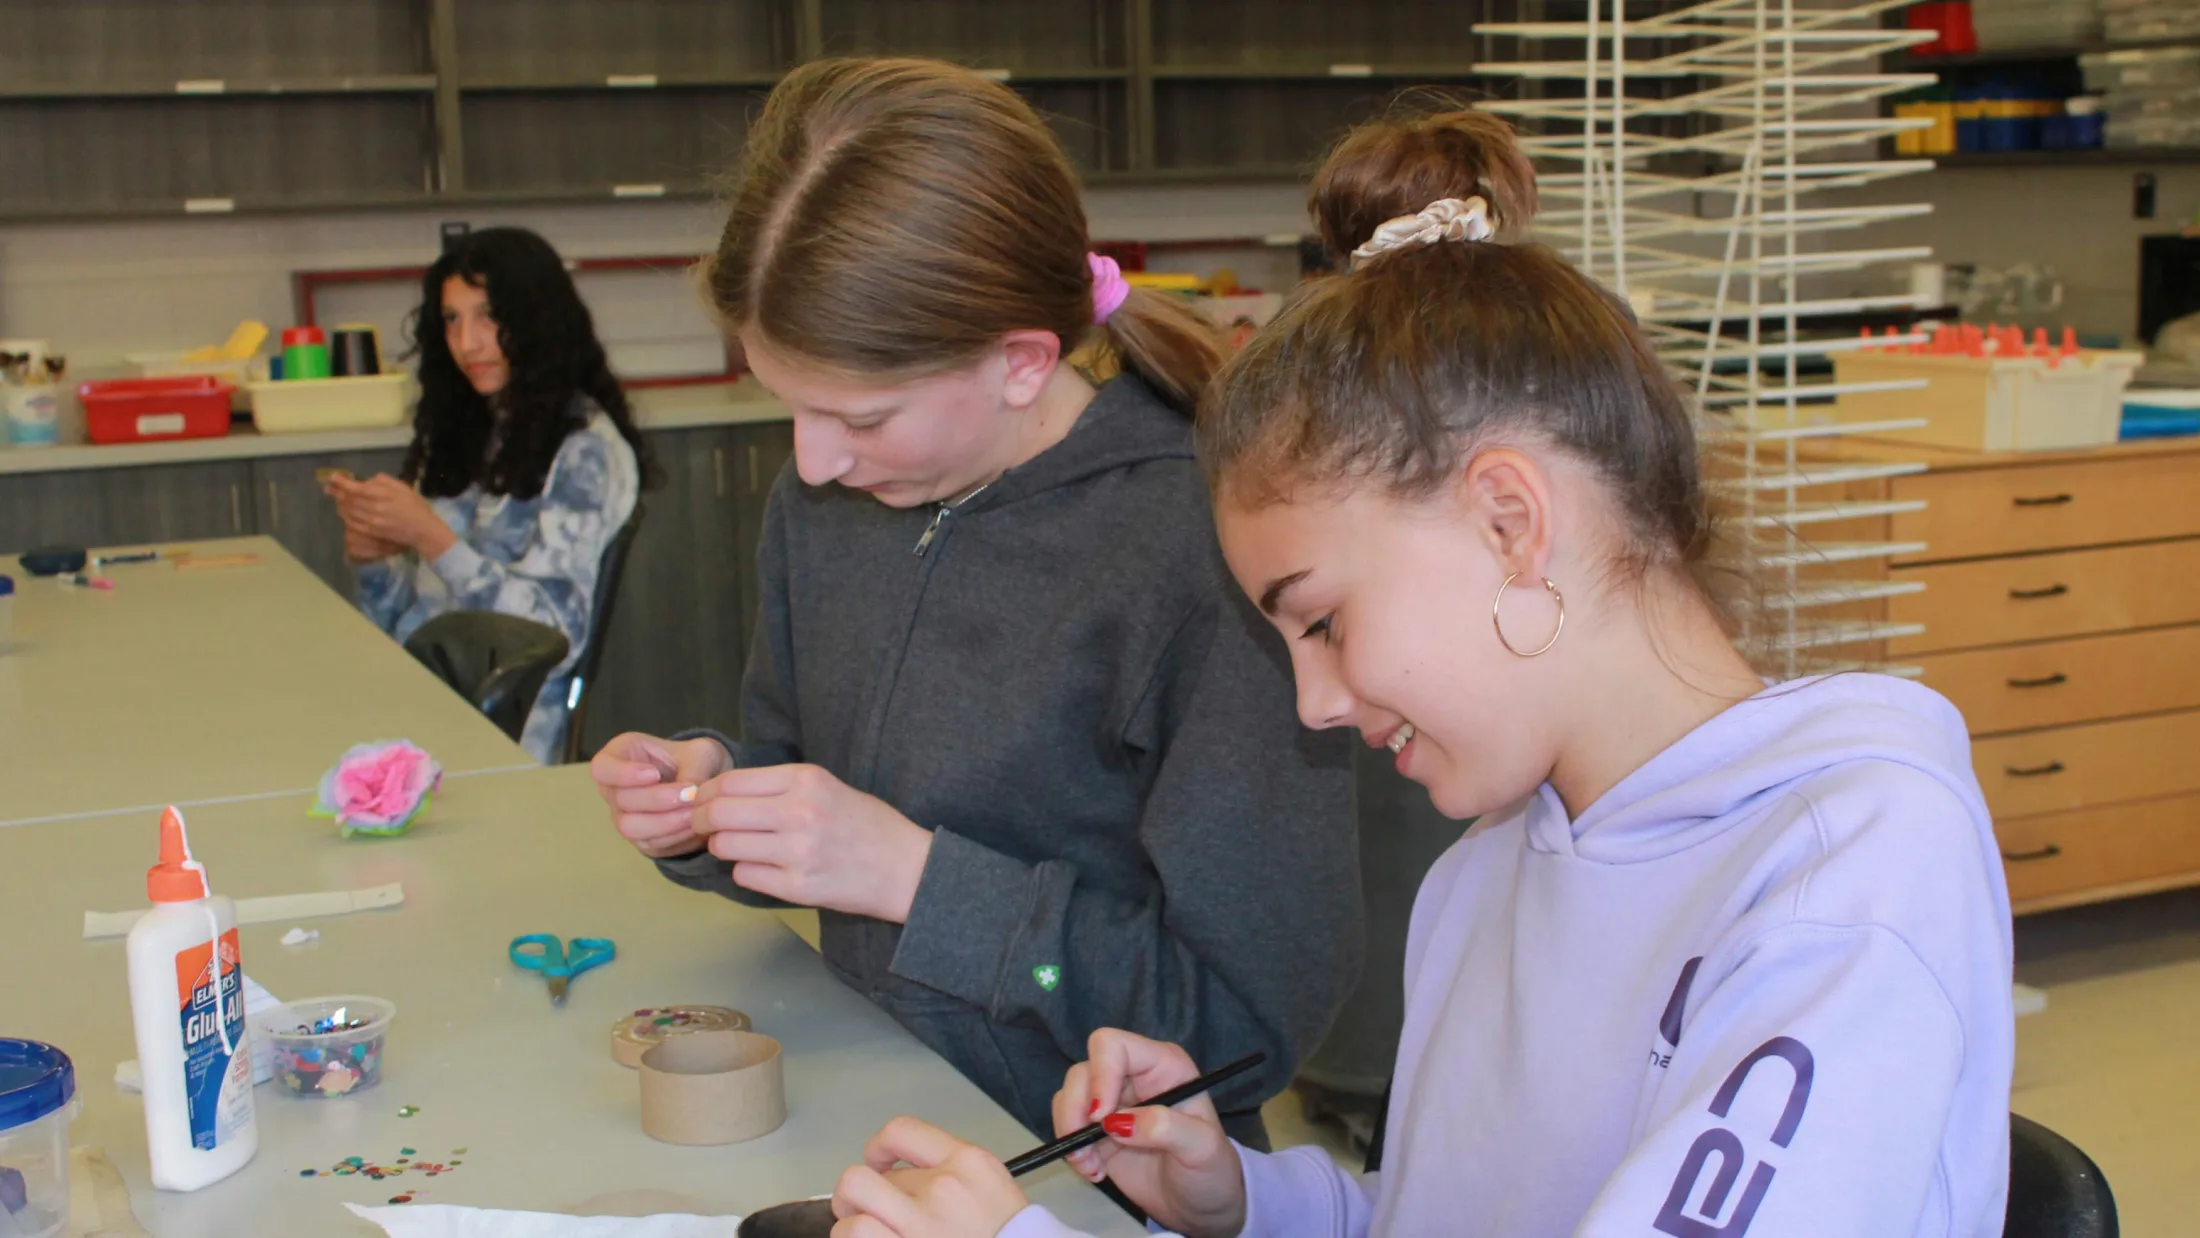 two female students working on a craft in art class.